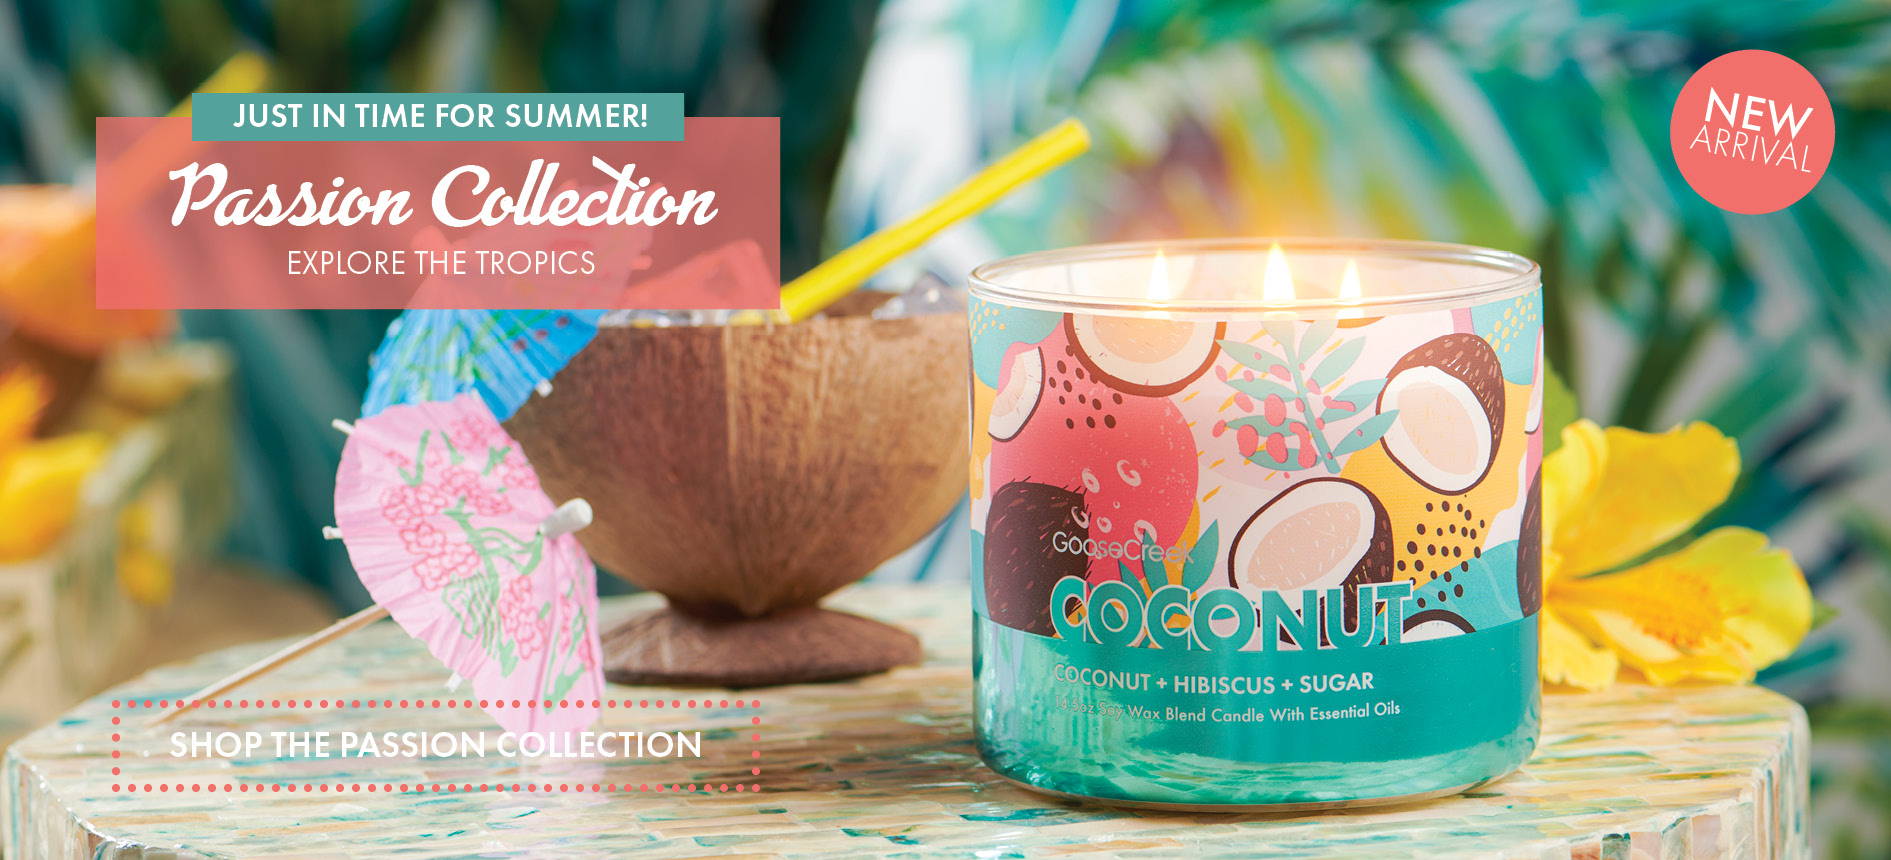 Coconut - The Passion Collection